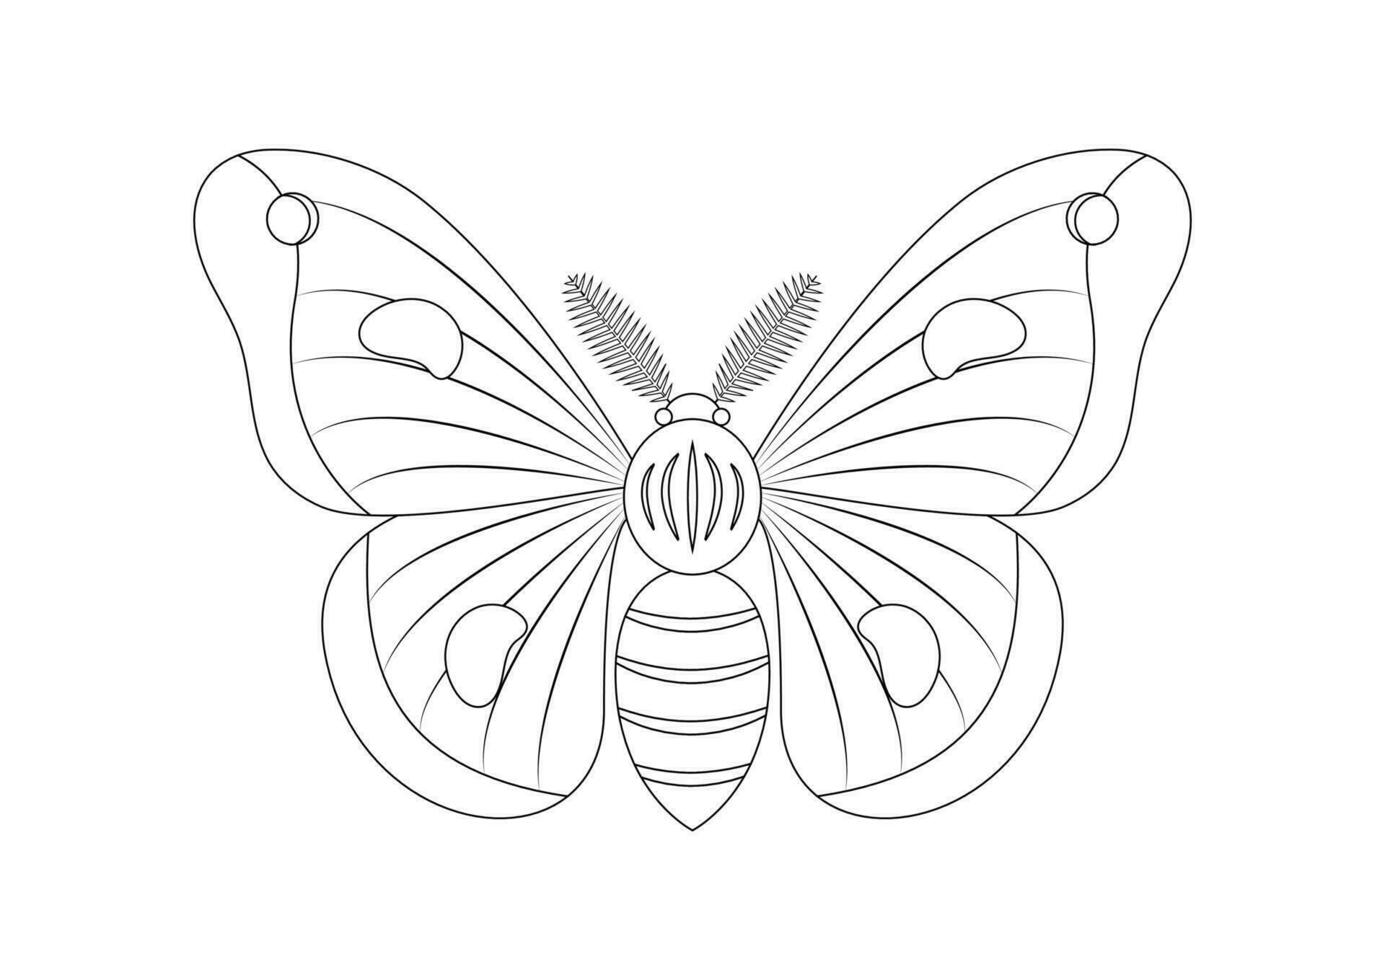 Black and White Moth Insect Clipart Vector isolated on White Background. Coloring Page of a Moth Insect